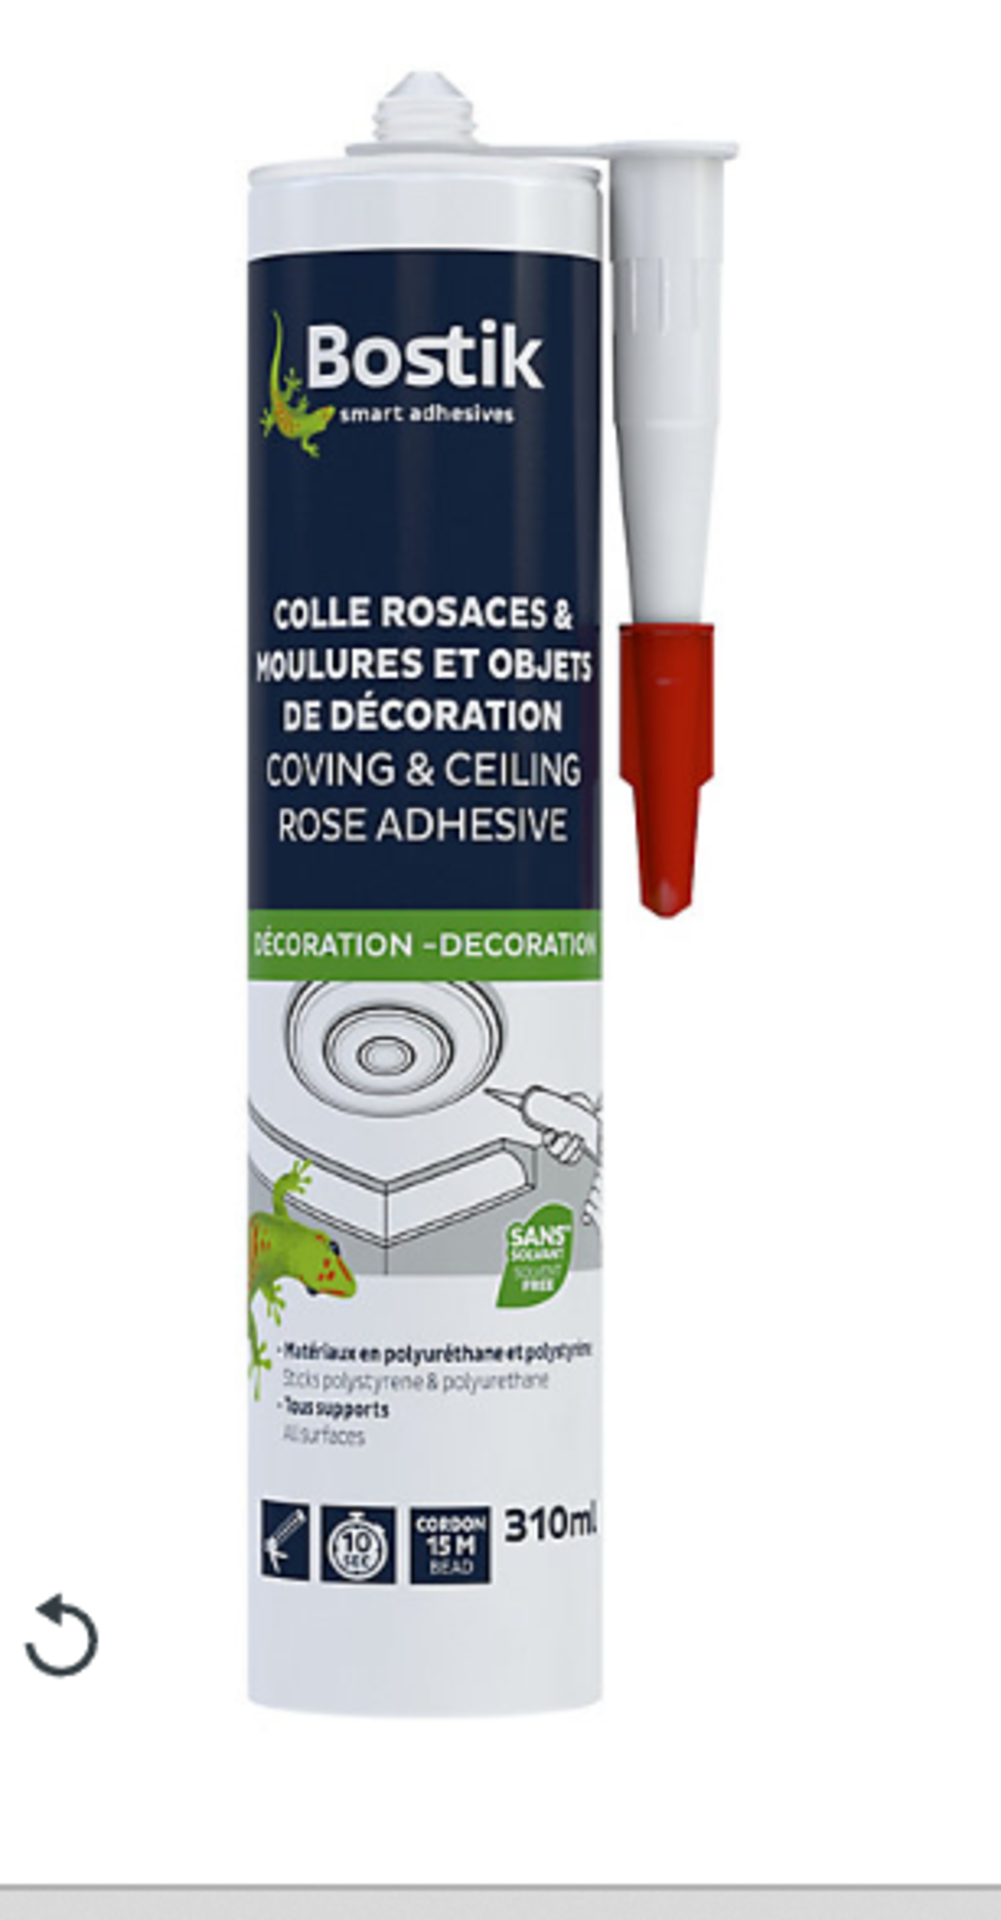 96 X BRAND NEW BOSTIK COVING & CEILING ROSE ADHESIVE 310ML EXPIRY RANGING BETWEEN 04/23-04/24